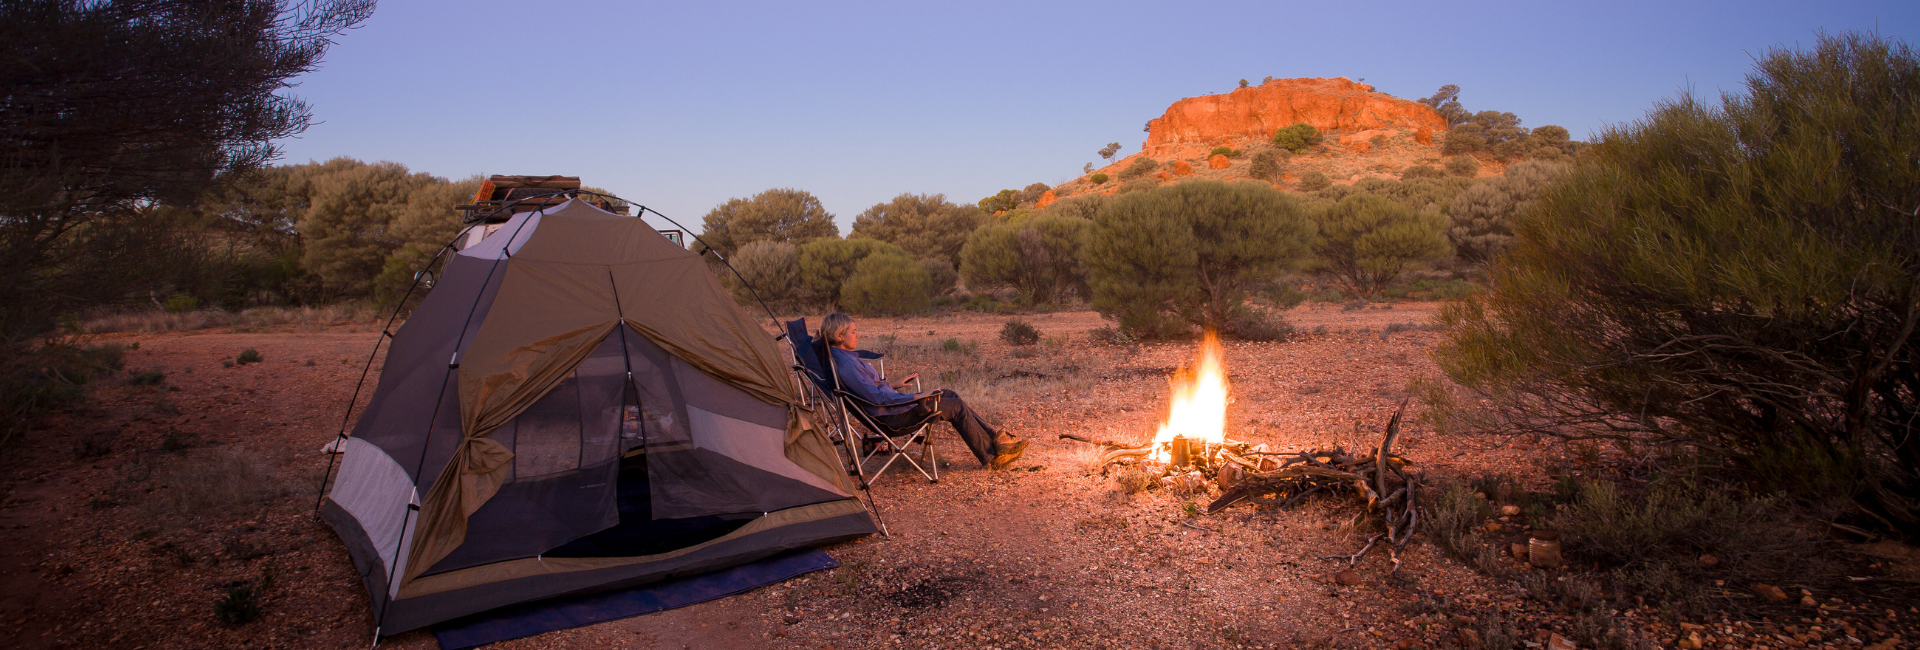 Camping in the Goldfields